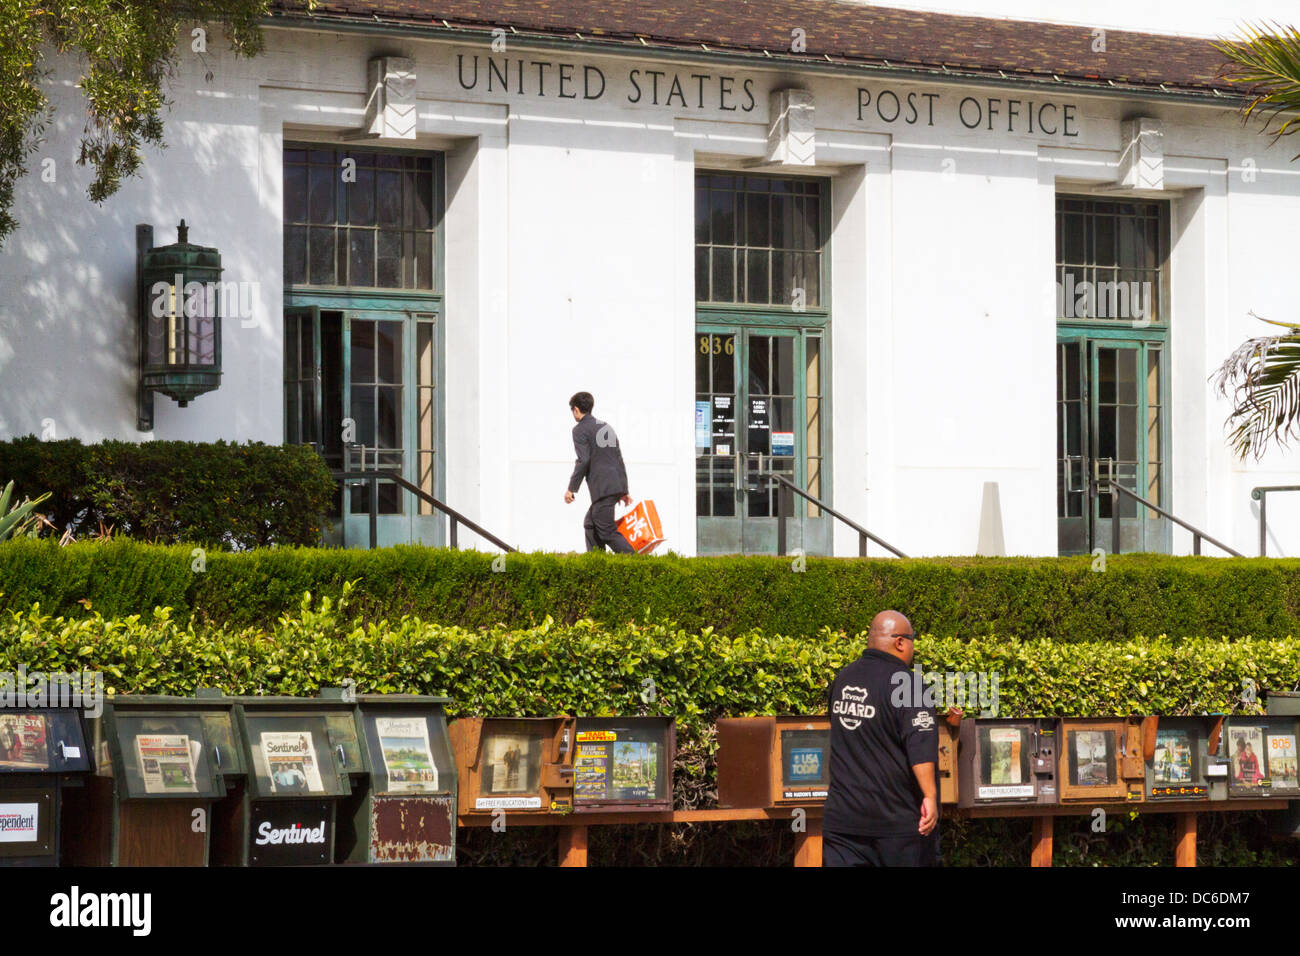 Street view of the front of a United States Post Office building in Santa Barbara, California Stock Photo